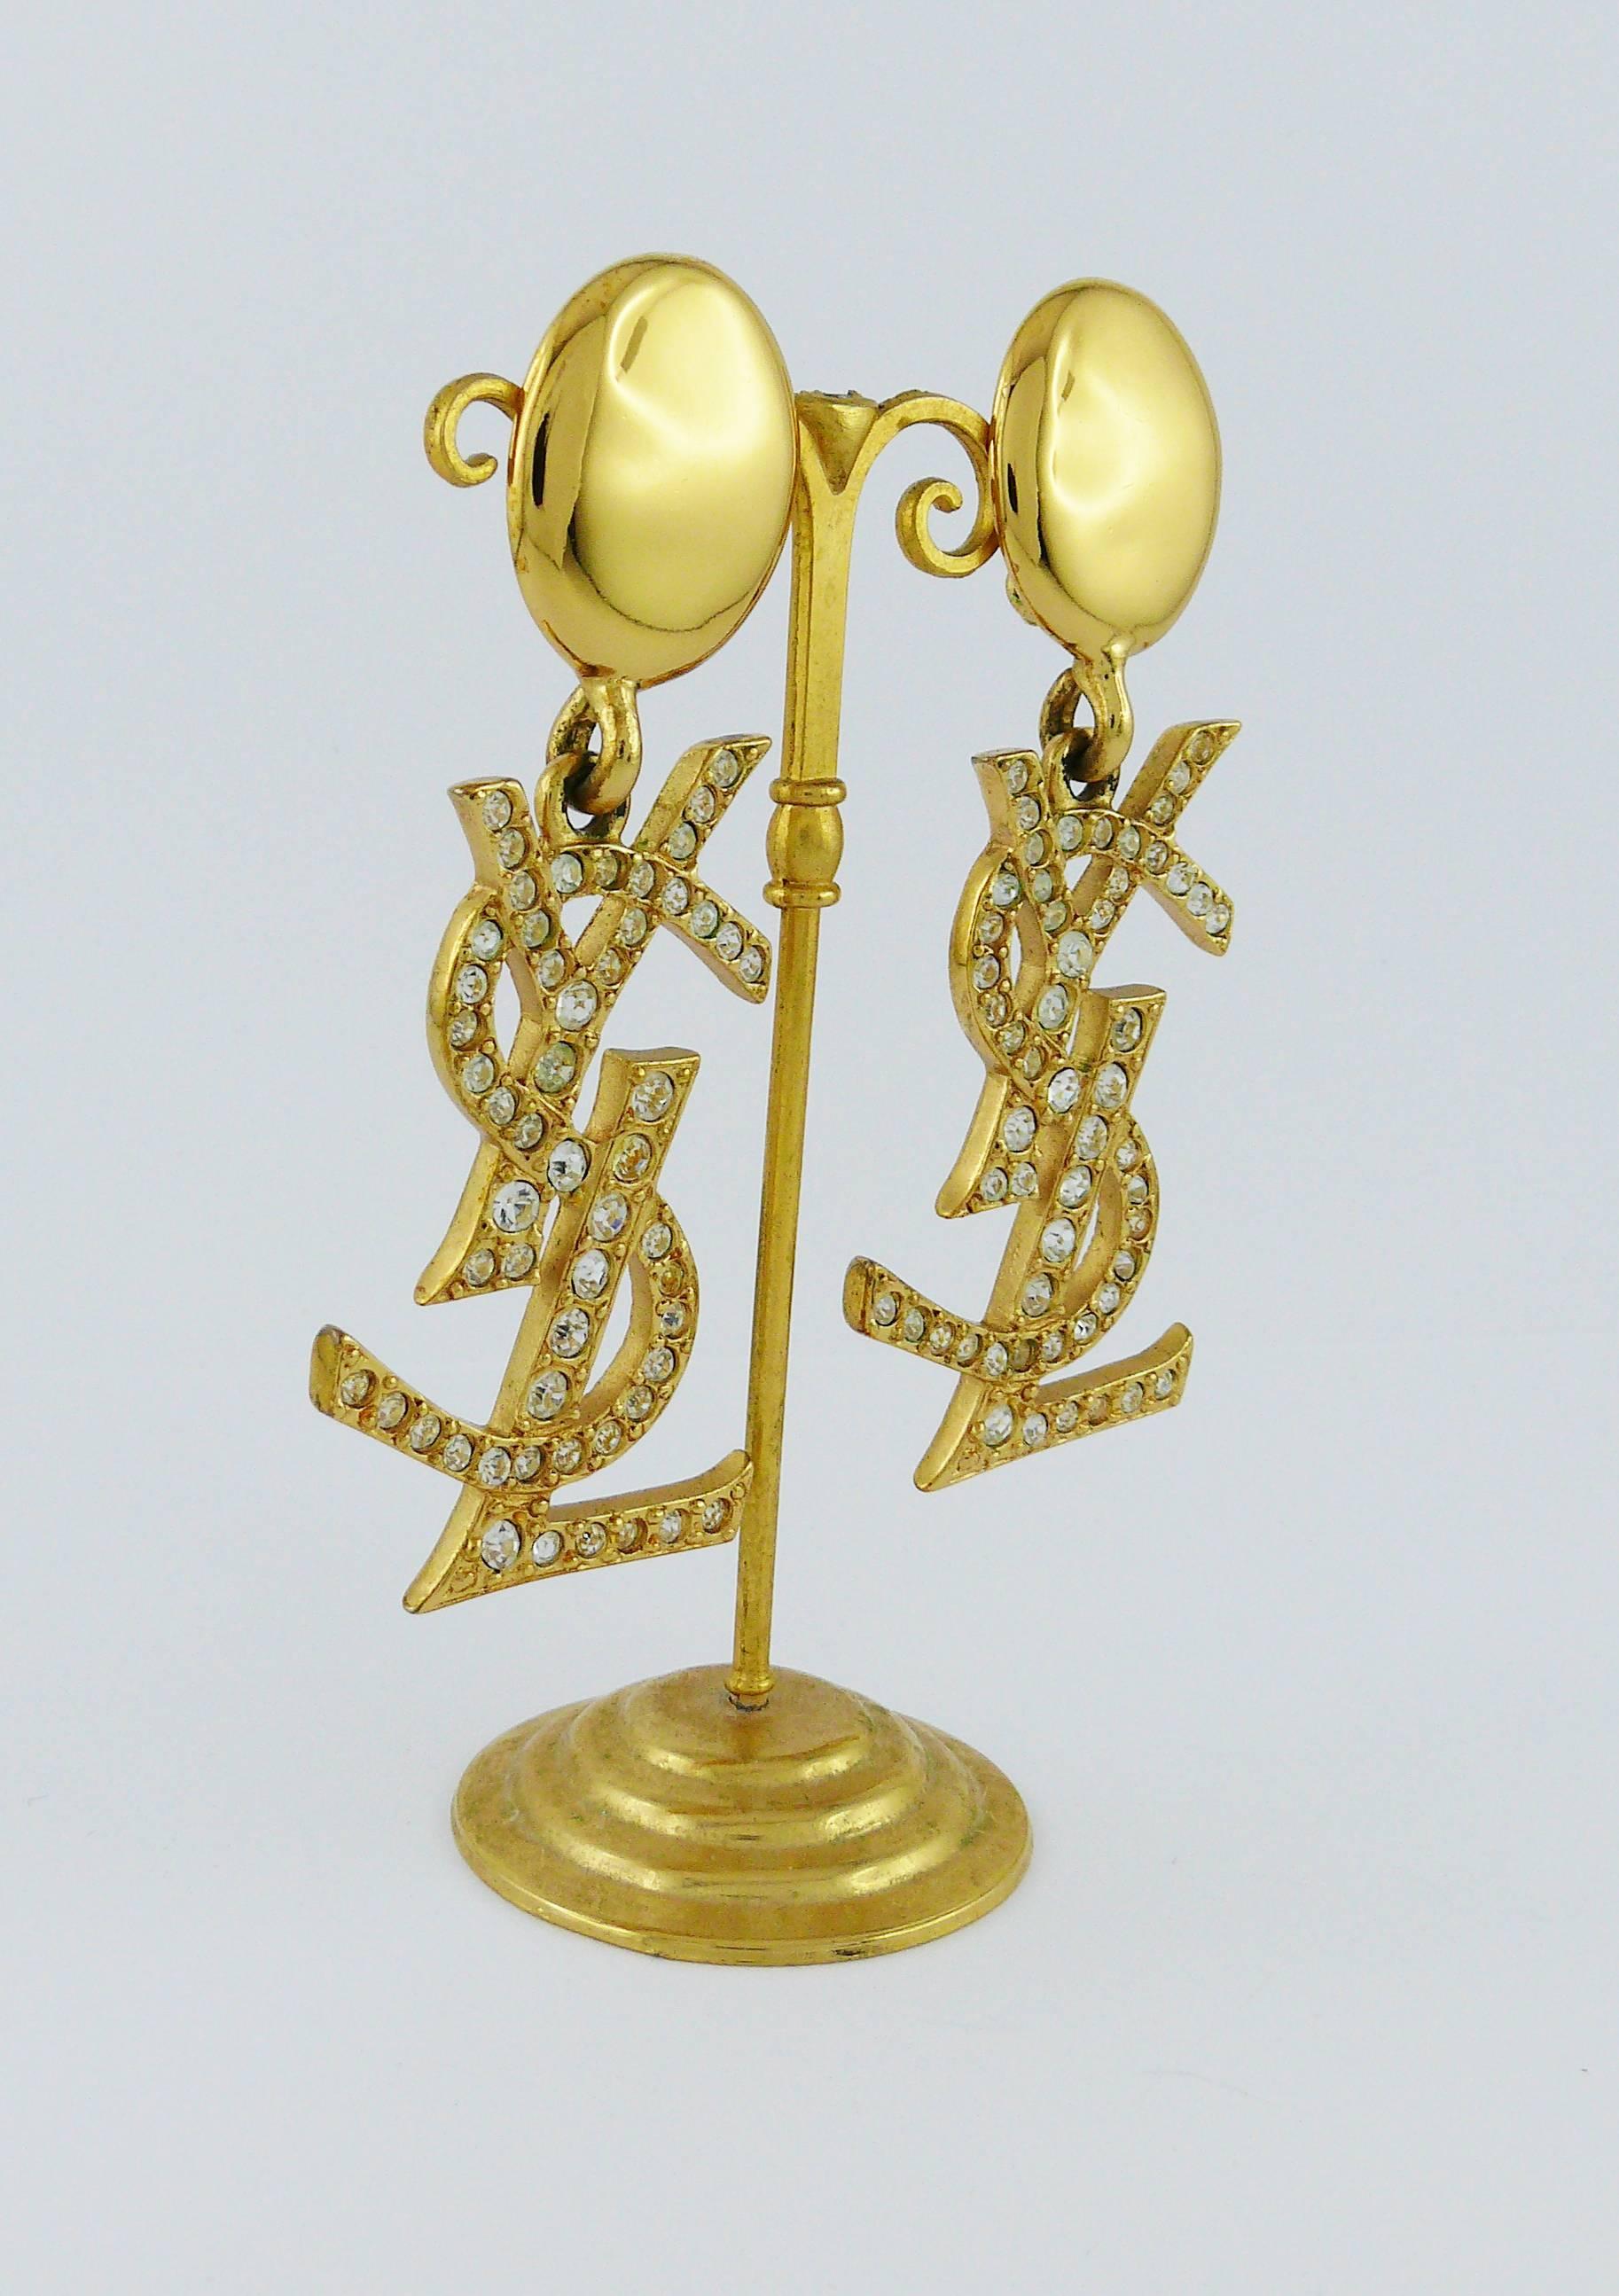 YVES SAINT LAURENT vintage rare massive gold toned dangling earrings (clip-on) featuring YSL monogram embellished with clear crystals.

Marked YSL Made in France.

Indicative measurements : length approx. 8 cm (3.15 inches) / max. width approx. 2.6